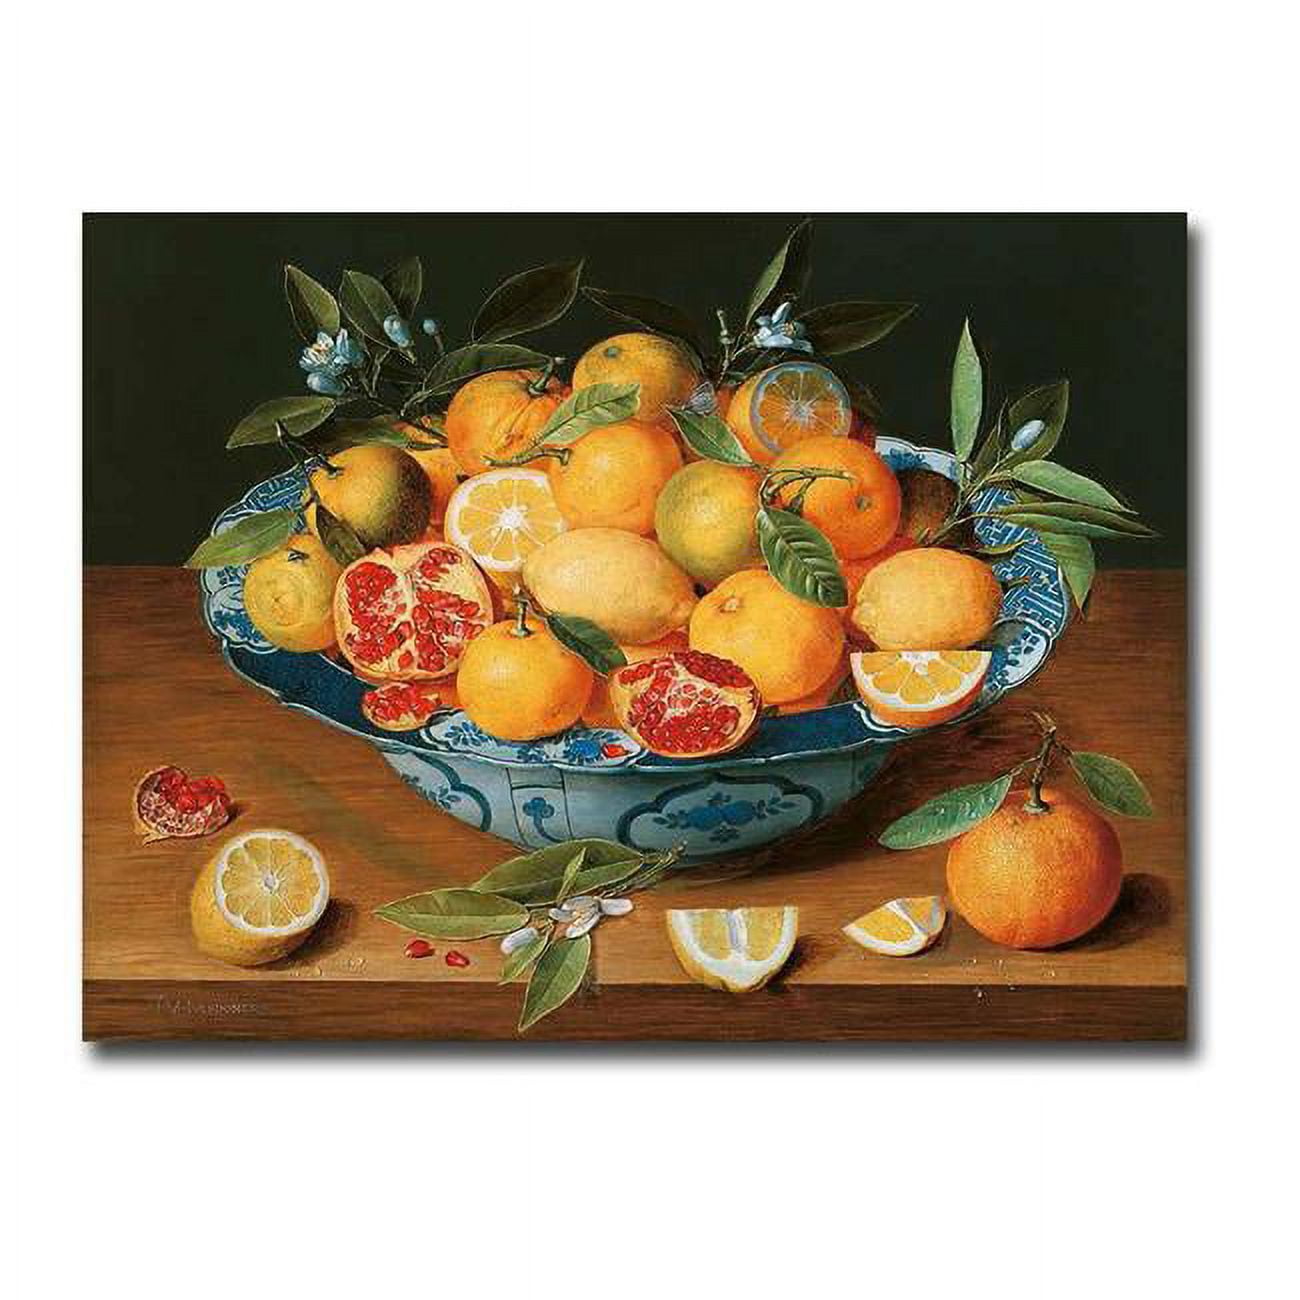 1216a484sag Still Life With Lemons - Oranges & A Pomegranate By Jacob Van Hulsdonck Premium Gallery-wrapped Canvas Giclee - 12 X 16 X 1.5 In.